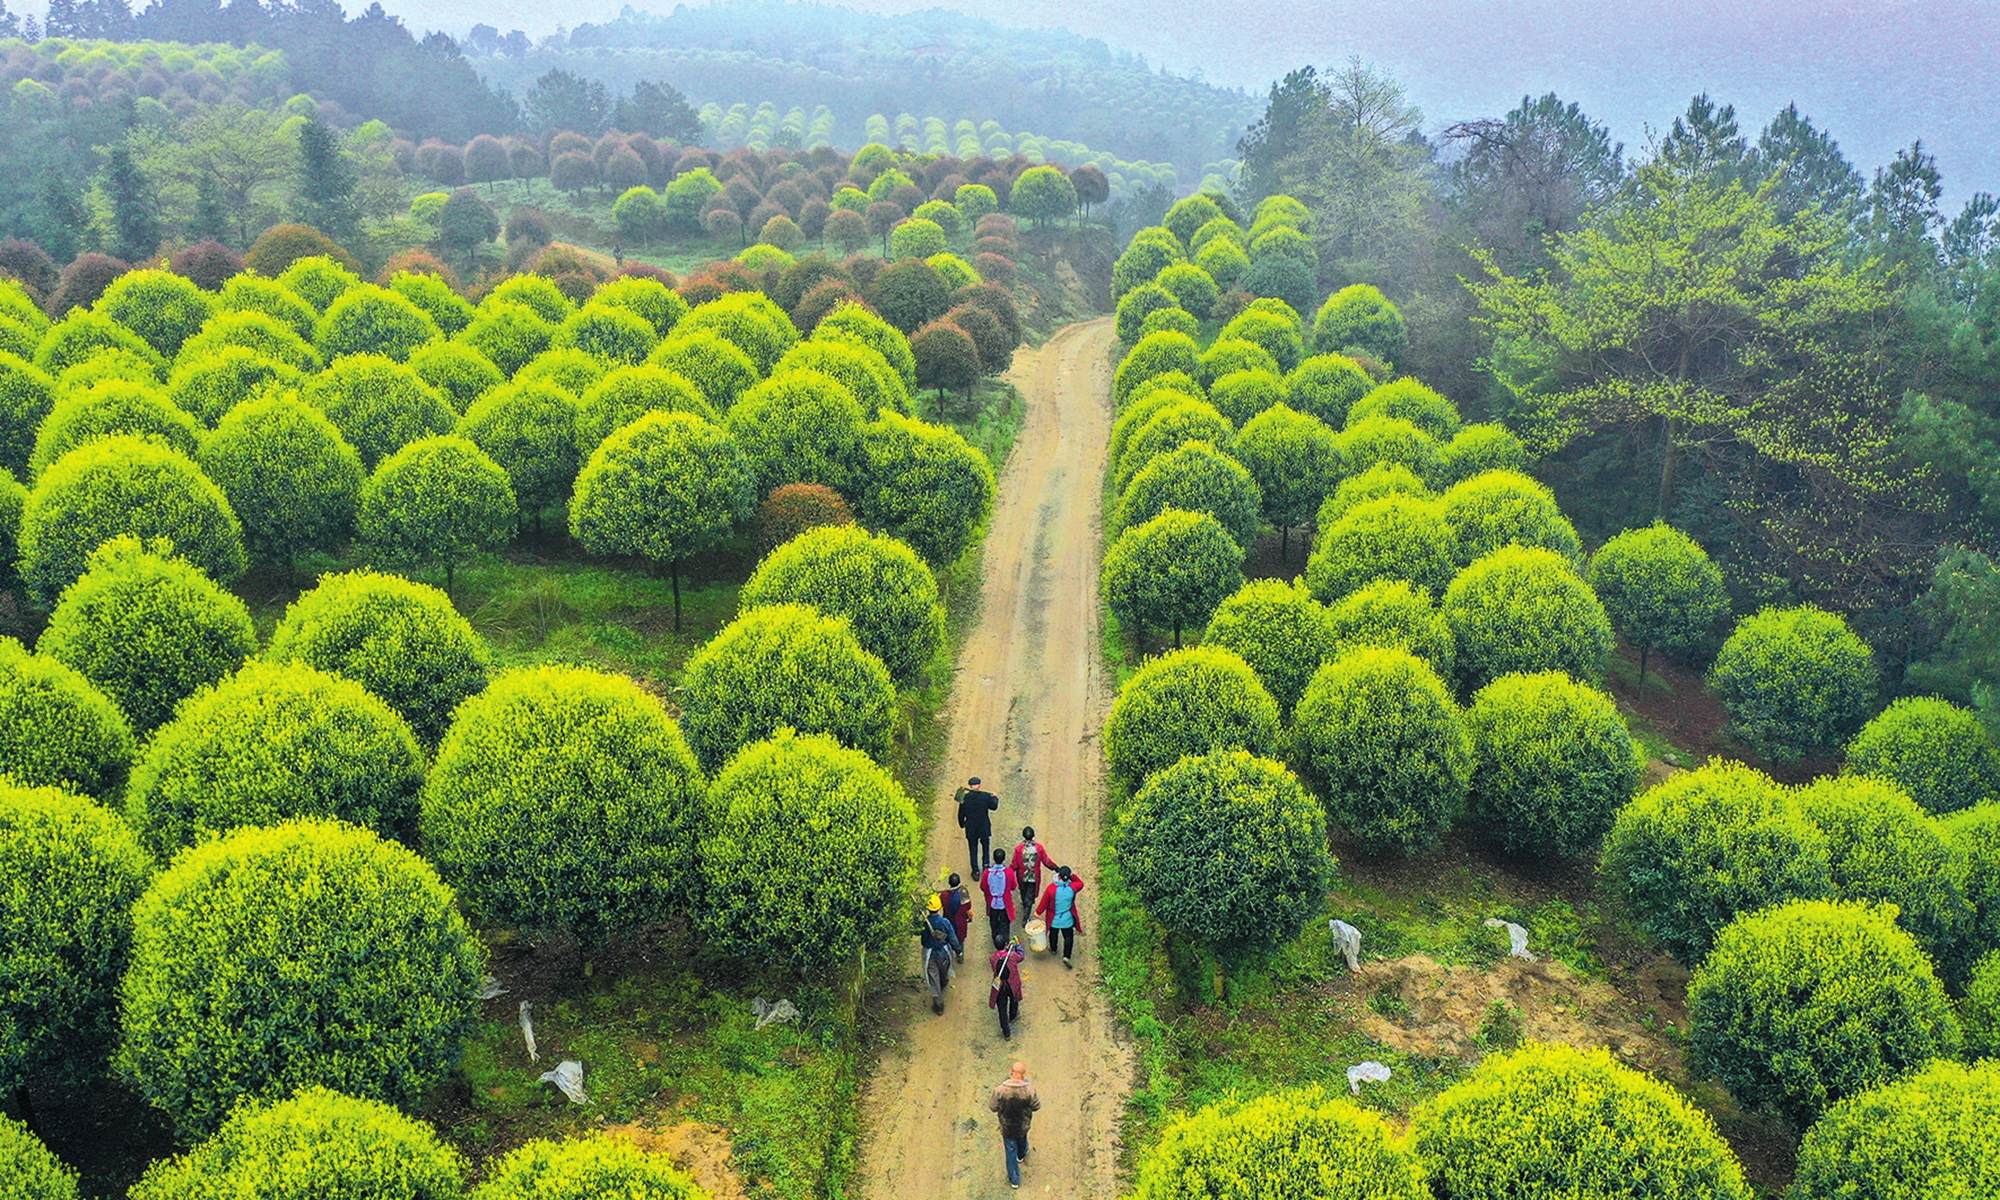 Villagers walk home after planting trees in Changxing Forestry Farm in Zigong, Southwest China's Sichuan Province, on March 11, 2021. Photo: VCG